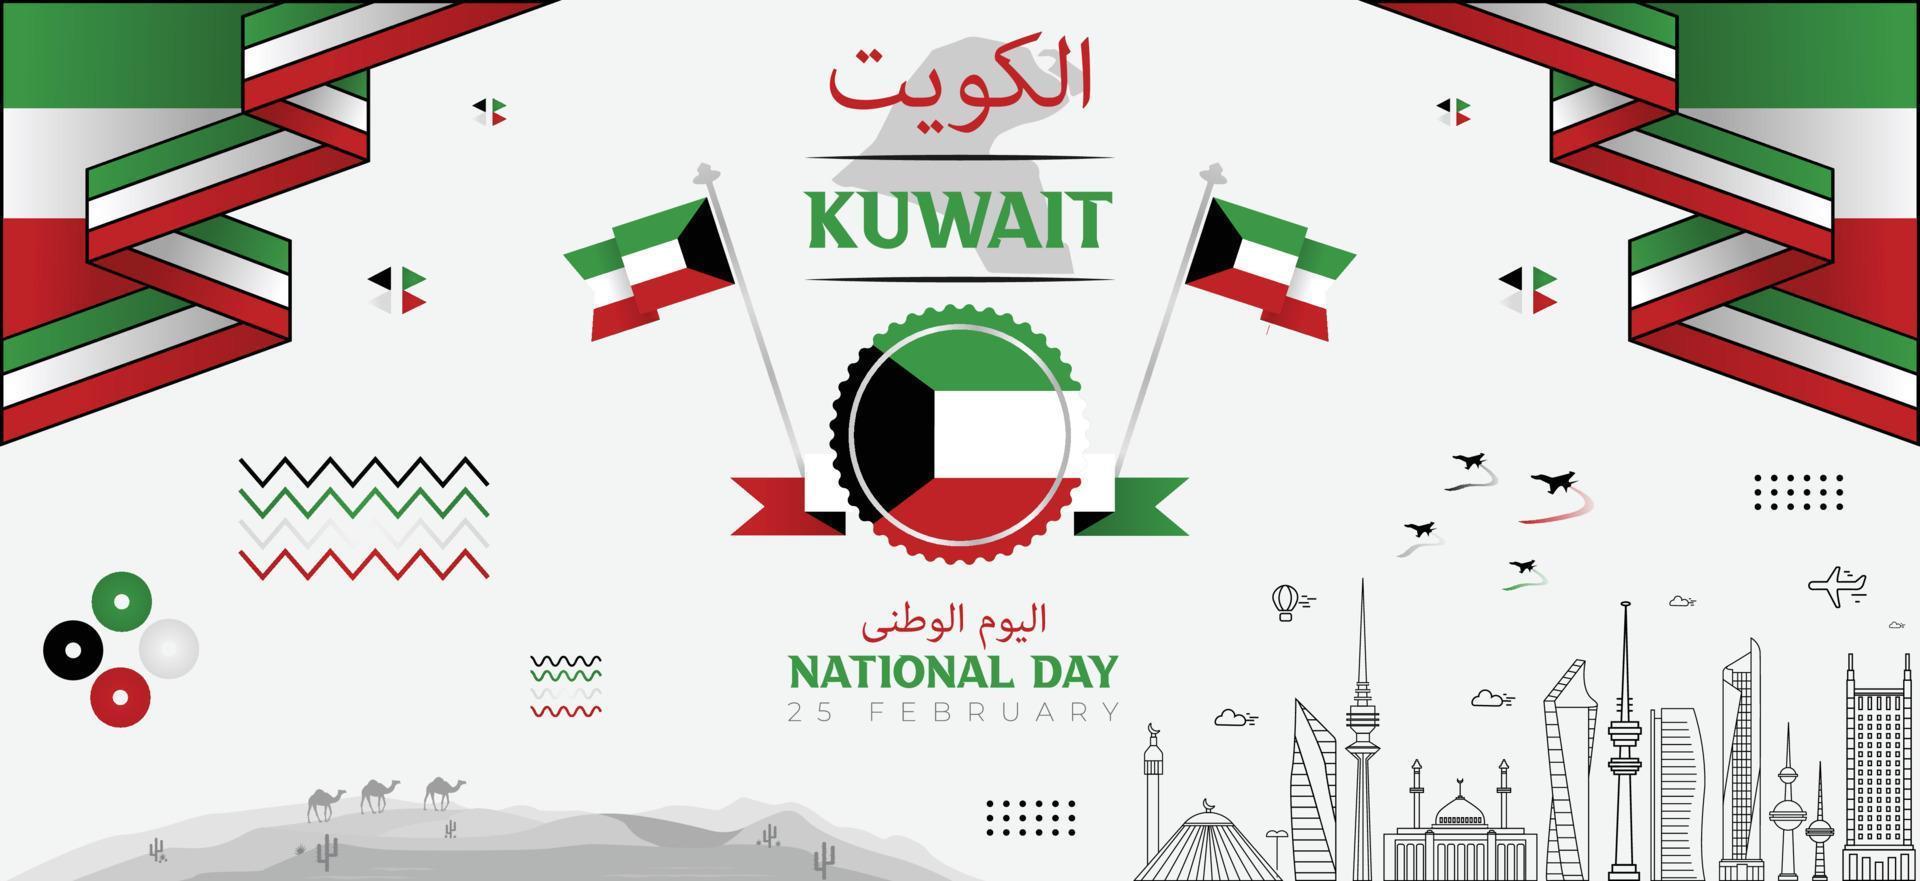 Kingdom of kuwait modern style banner with national day, famous buildings, geometric map, deserts and traditional style concept vector illustration.